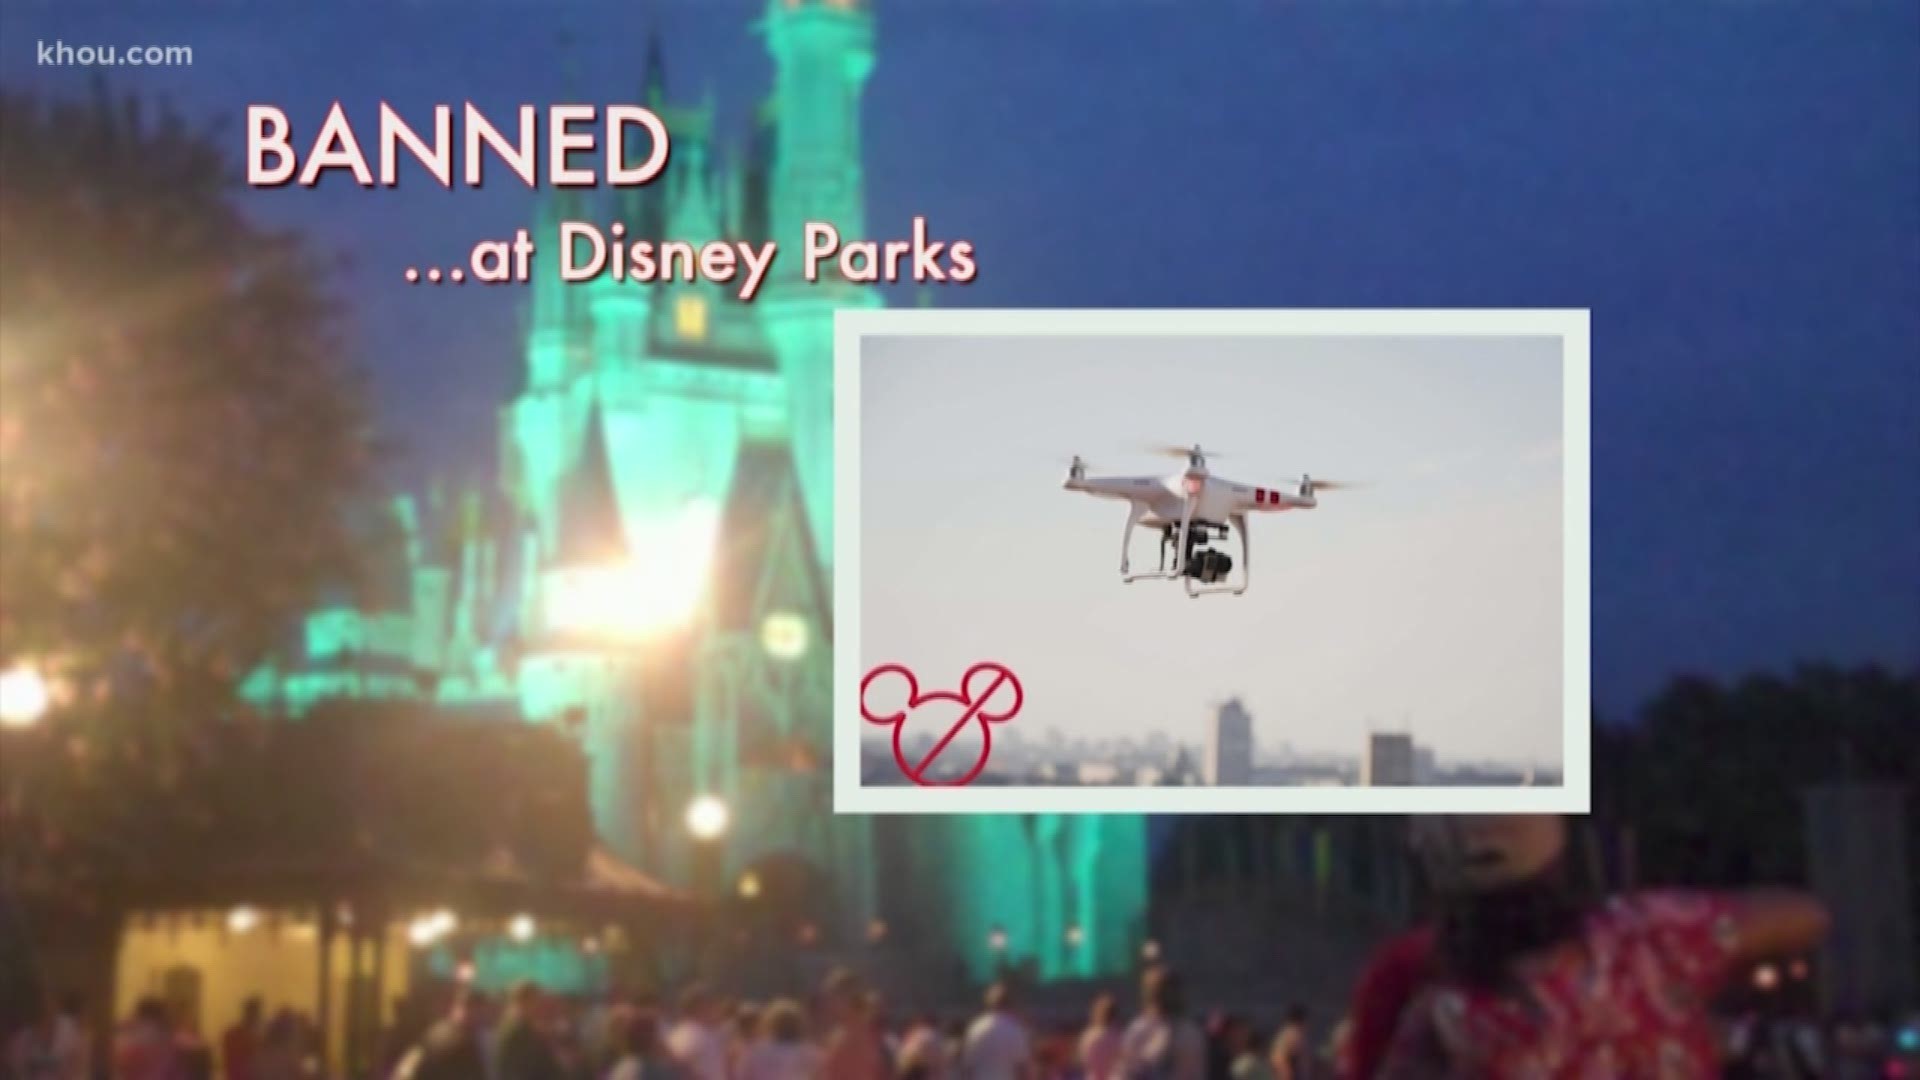 Summer vacation season is starting. And as almost all travelers know, Disney World and Disneyland are the happiest places on earth. Unless, that is, you try to bring in an item that is banned from their parks.